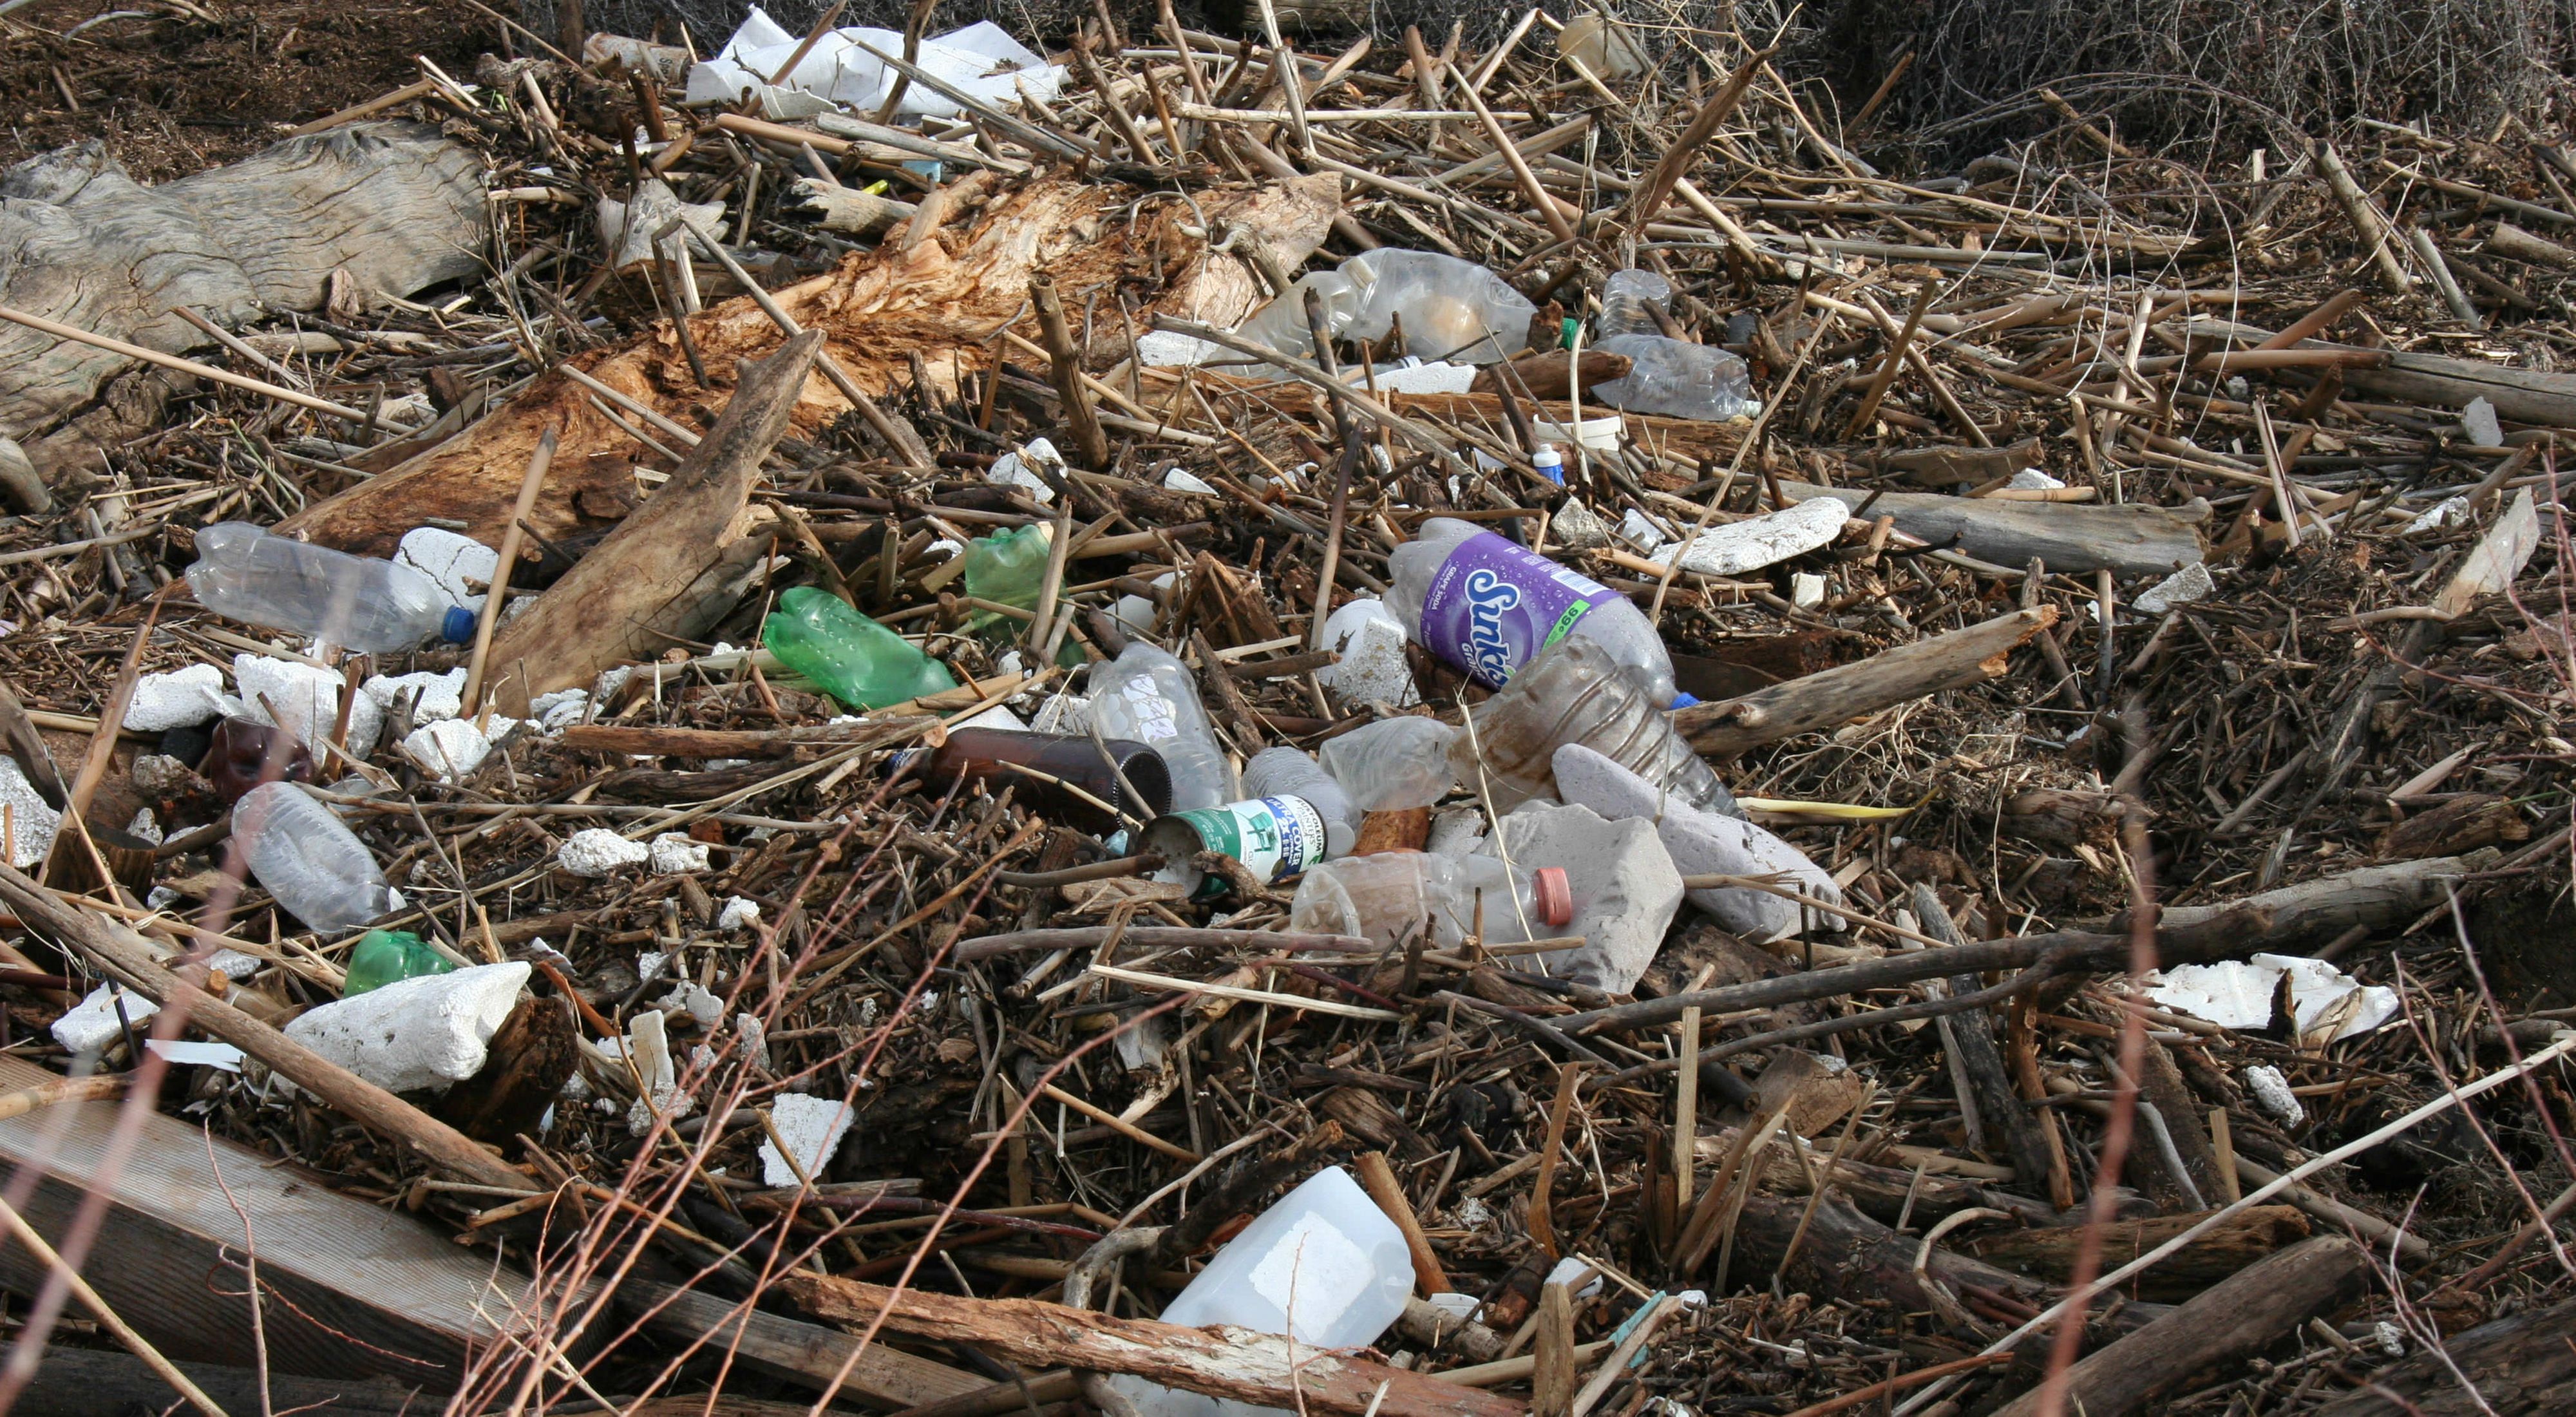 Close up view of a pile of garbage. Discarded cans, glass bottles and plastic milk jugs and soda bottles are scattered across a thick pile of sticks, logs and broken wood.